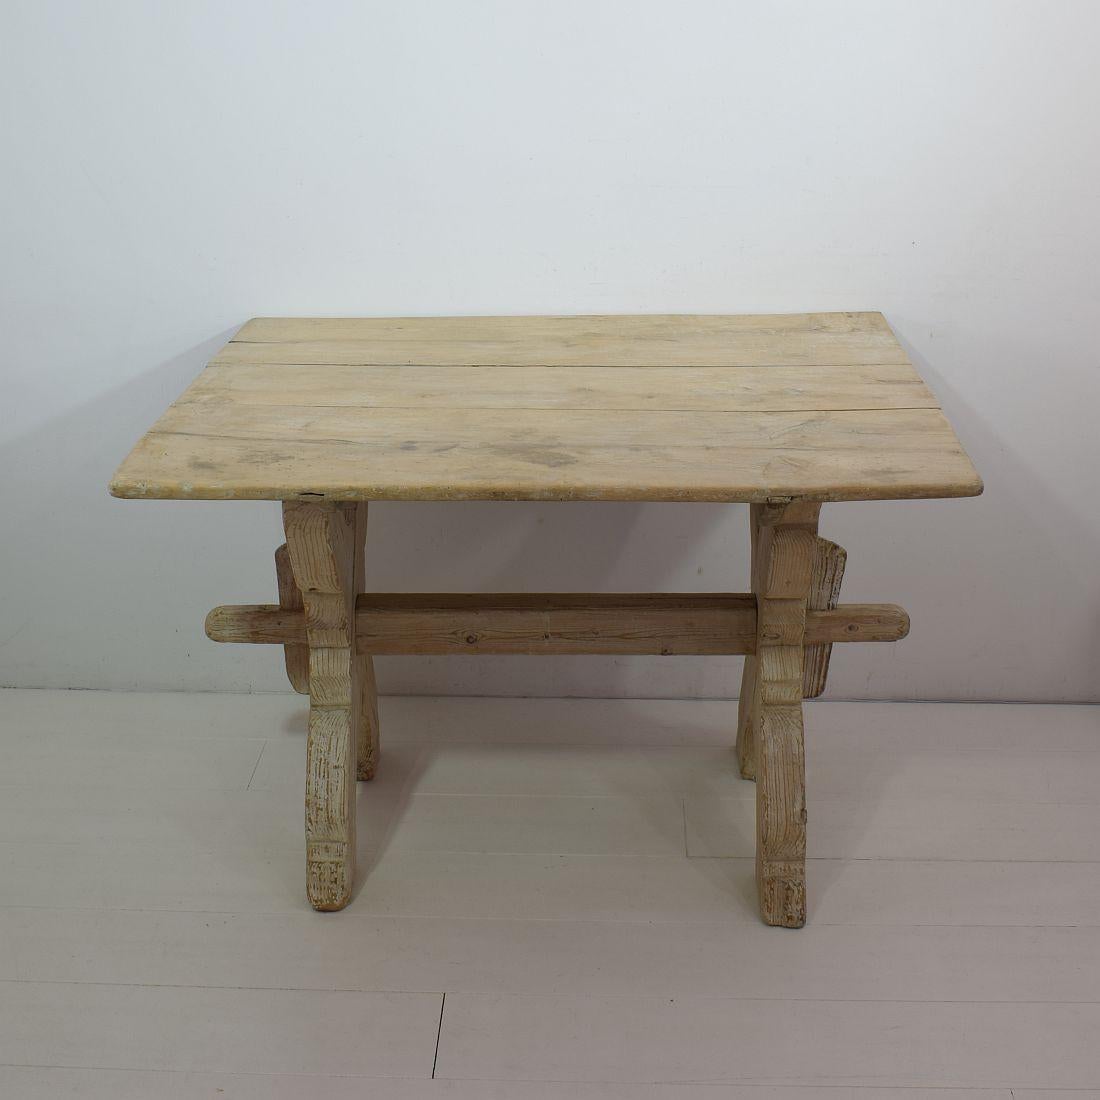 Beautiful X-frame bock board trestle table with faded traces of white paint.
Sweden, 18th century. Weathered small losses and old repairs. Old inactive woodworm holes visible.
More pictures available on request.